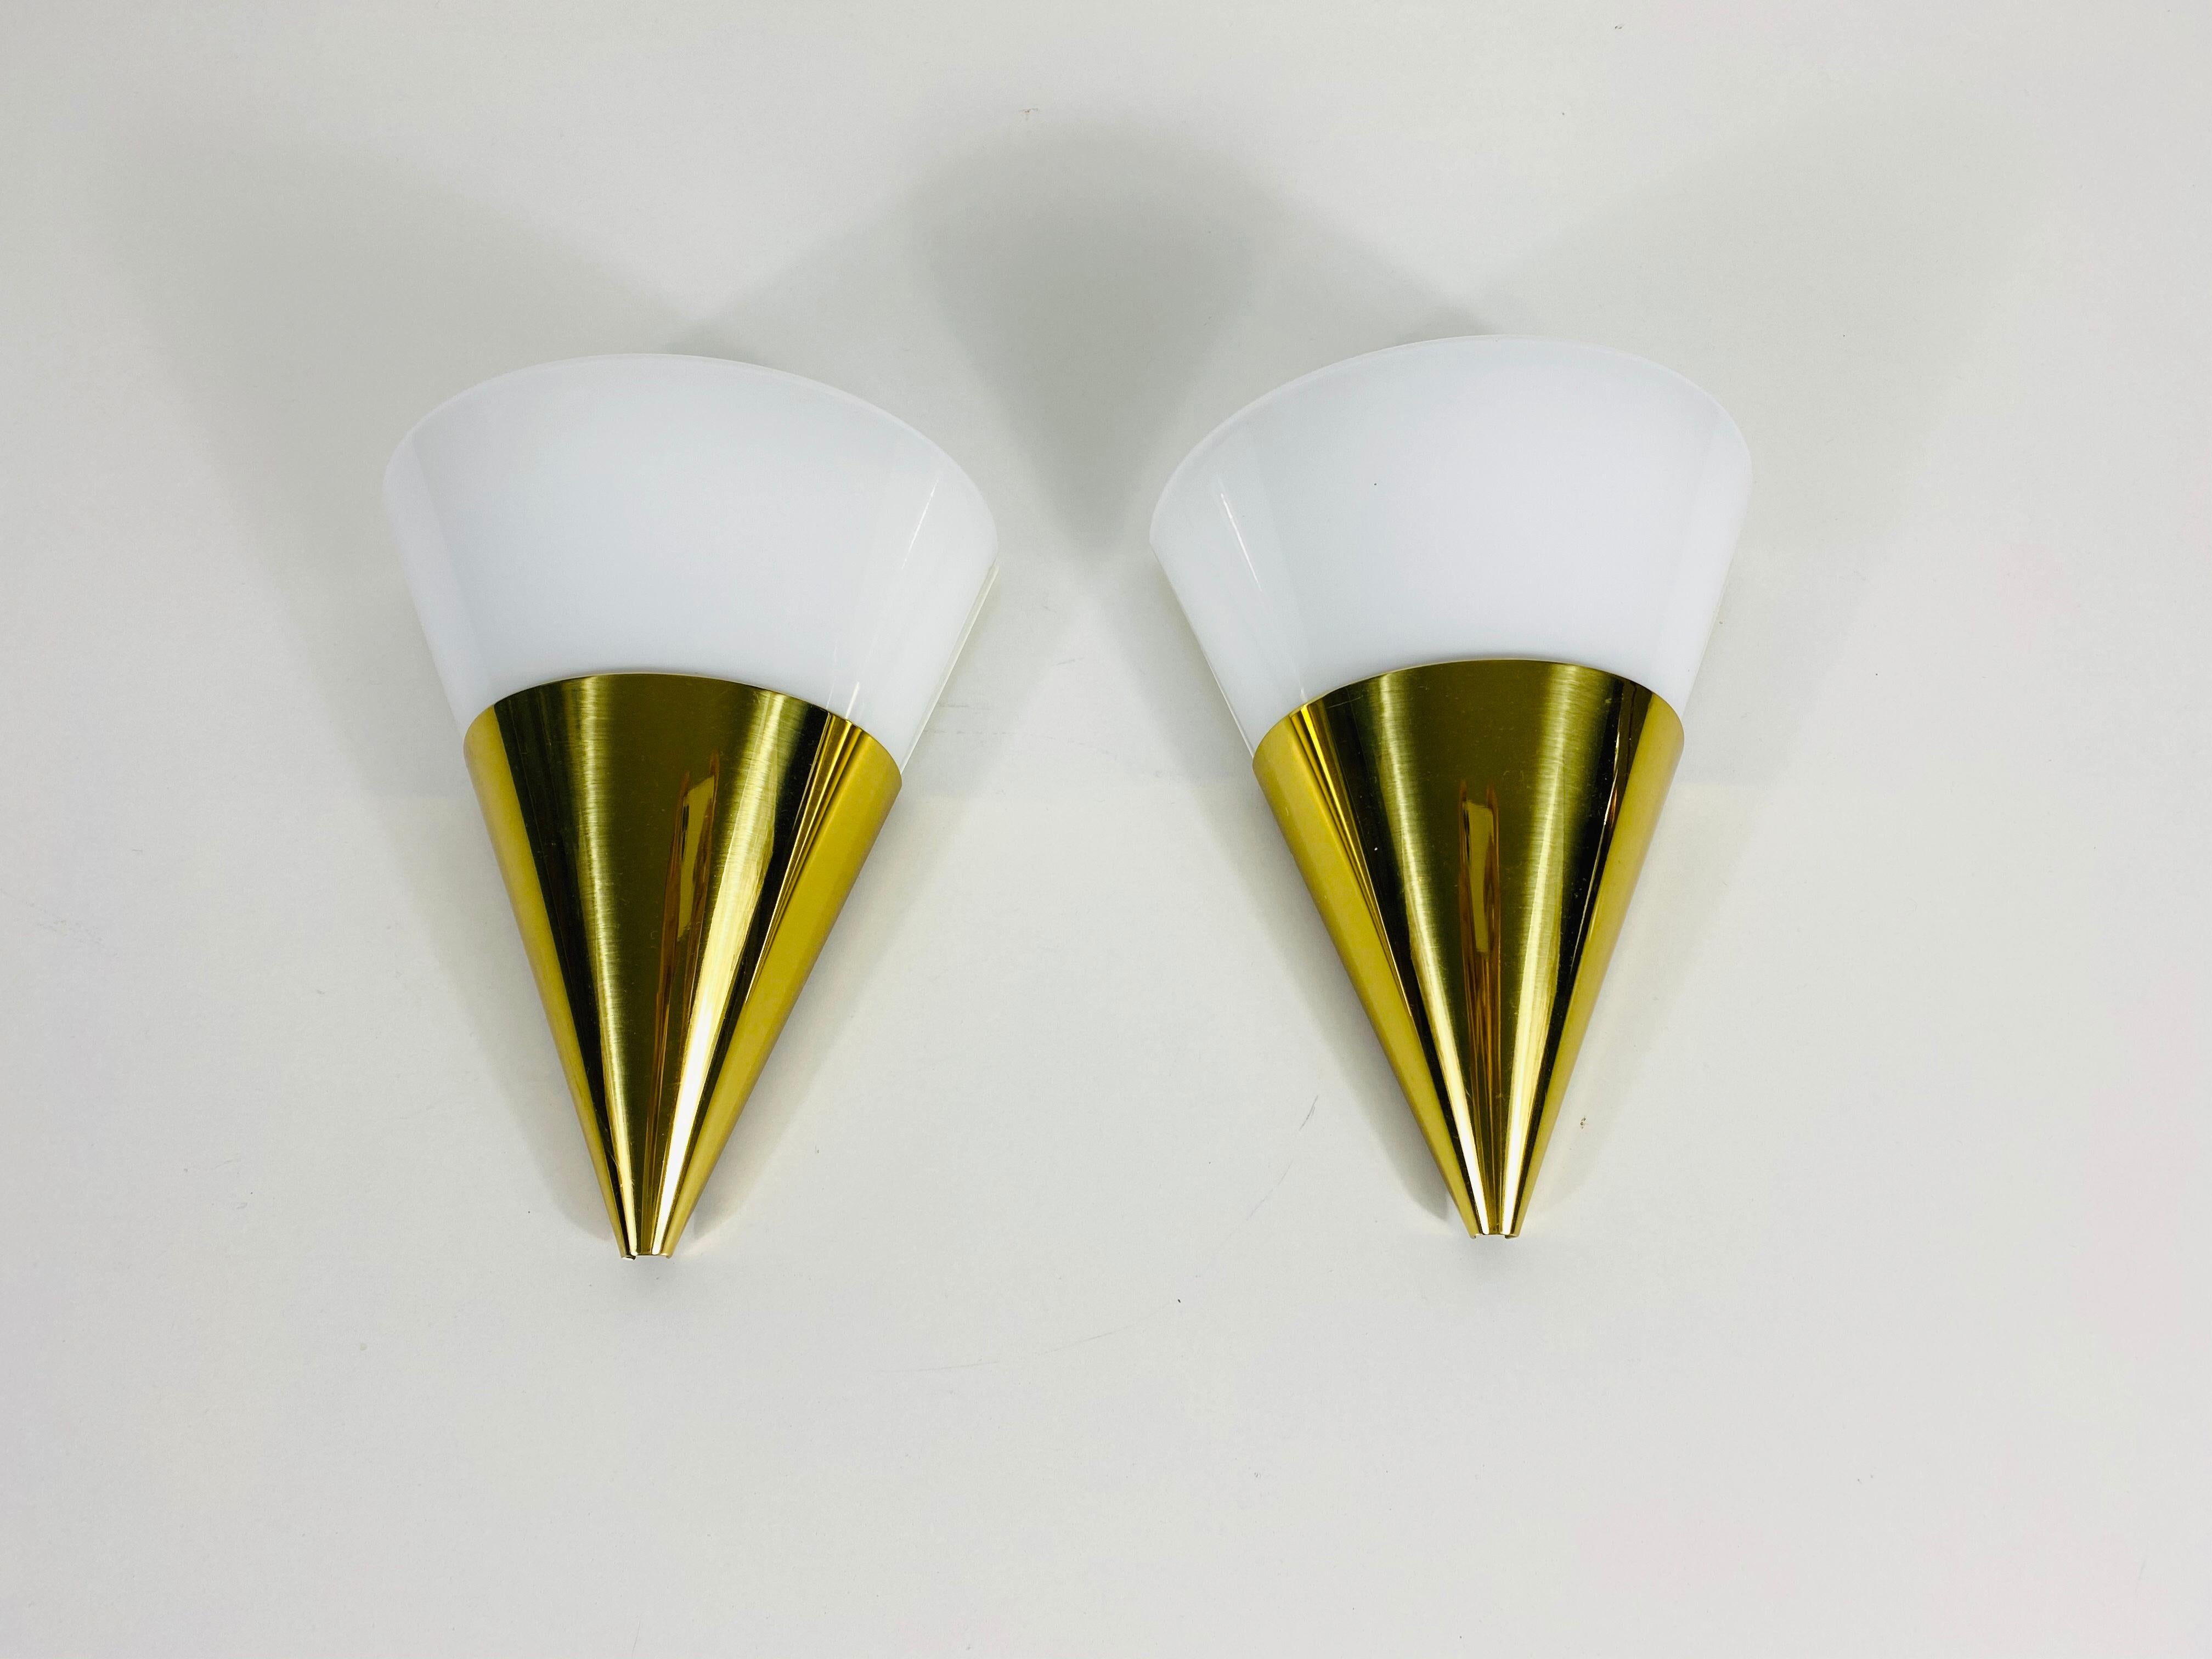 Pair of Modernist Brass and Opaline Glass Wall Lamps by Limburg, Germany, 1980s For Sale 1